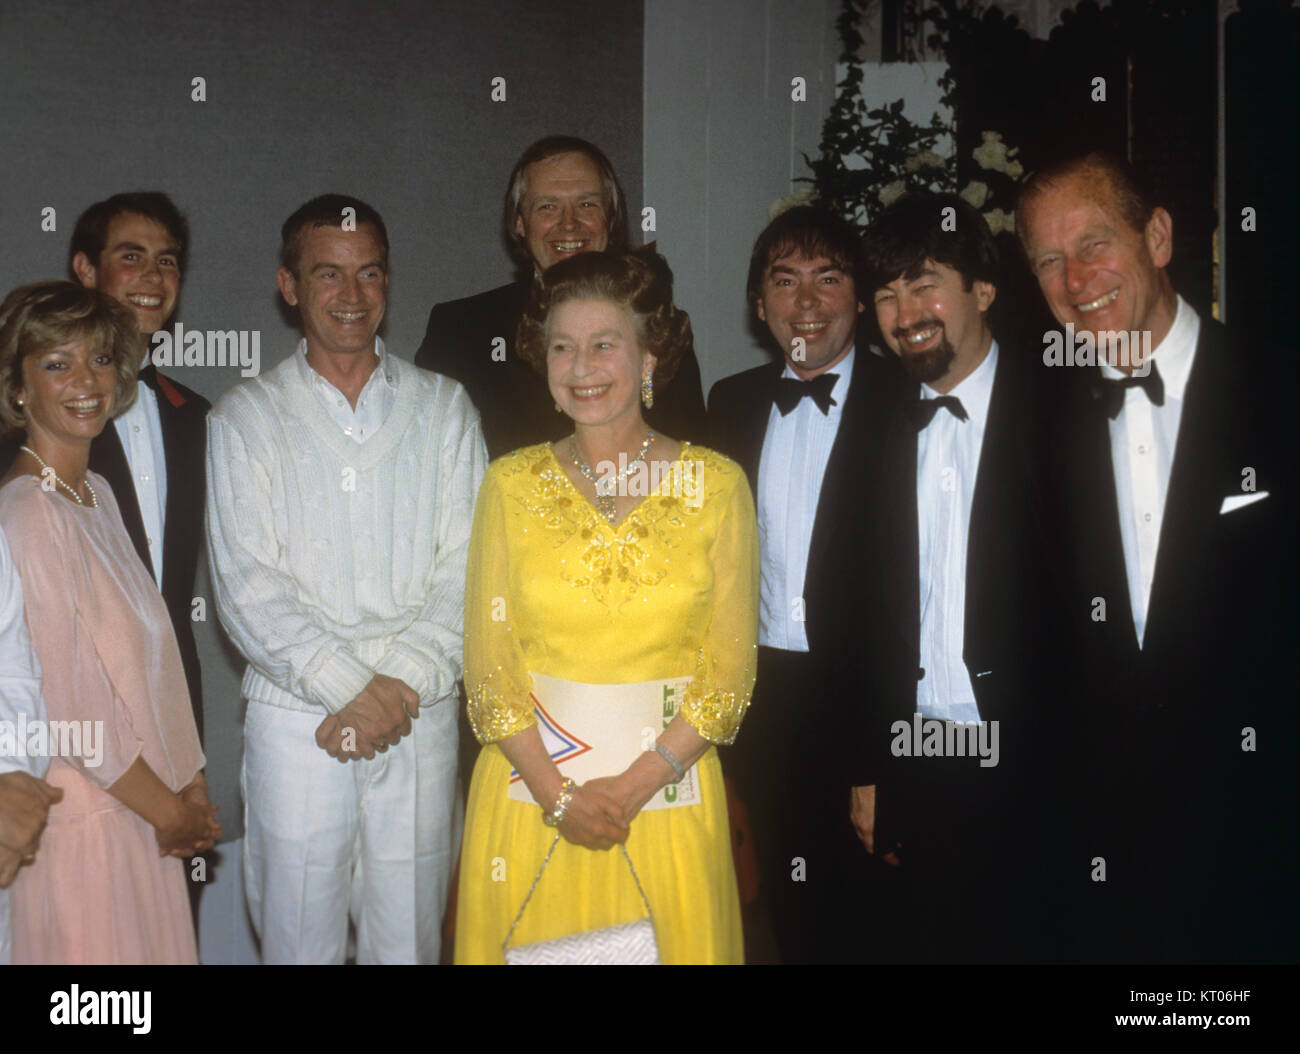 At the Royal Ascot Ball at Windsor Castle (l-r) singer Sarah Payne, Prince Edward, actor Ian Charleson, Queen Elizabeth II, lyricist Tim Rice (behind the Queen), composer Andrew Lloyd Webber, theatre director Trevor Nunn and Prince Philip, Duke of Edinburgh. Prince Edward recently invited Andrew Lloyd Webber and Tim Rice to write a piece of music as birthday presents for his Royal parents. The piece - called 'Cricket' - was directed by Trevor Nunn and performed during the ball. Stock Photo